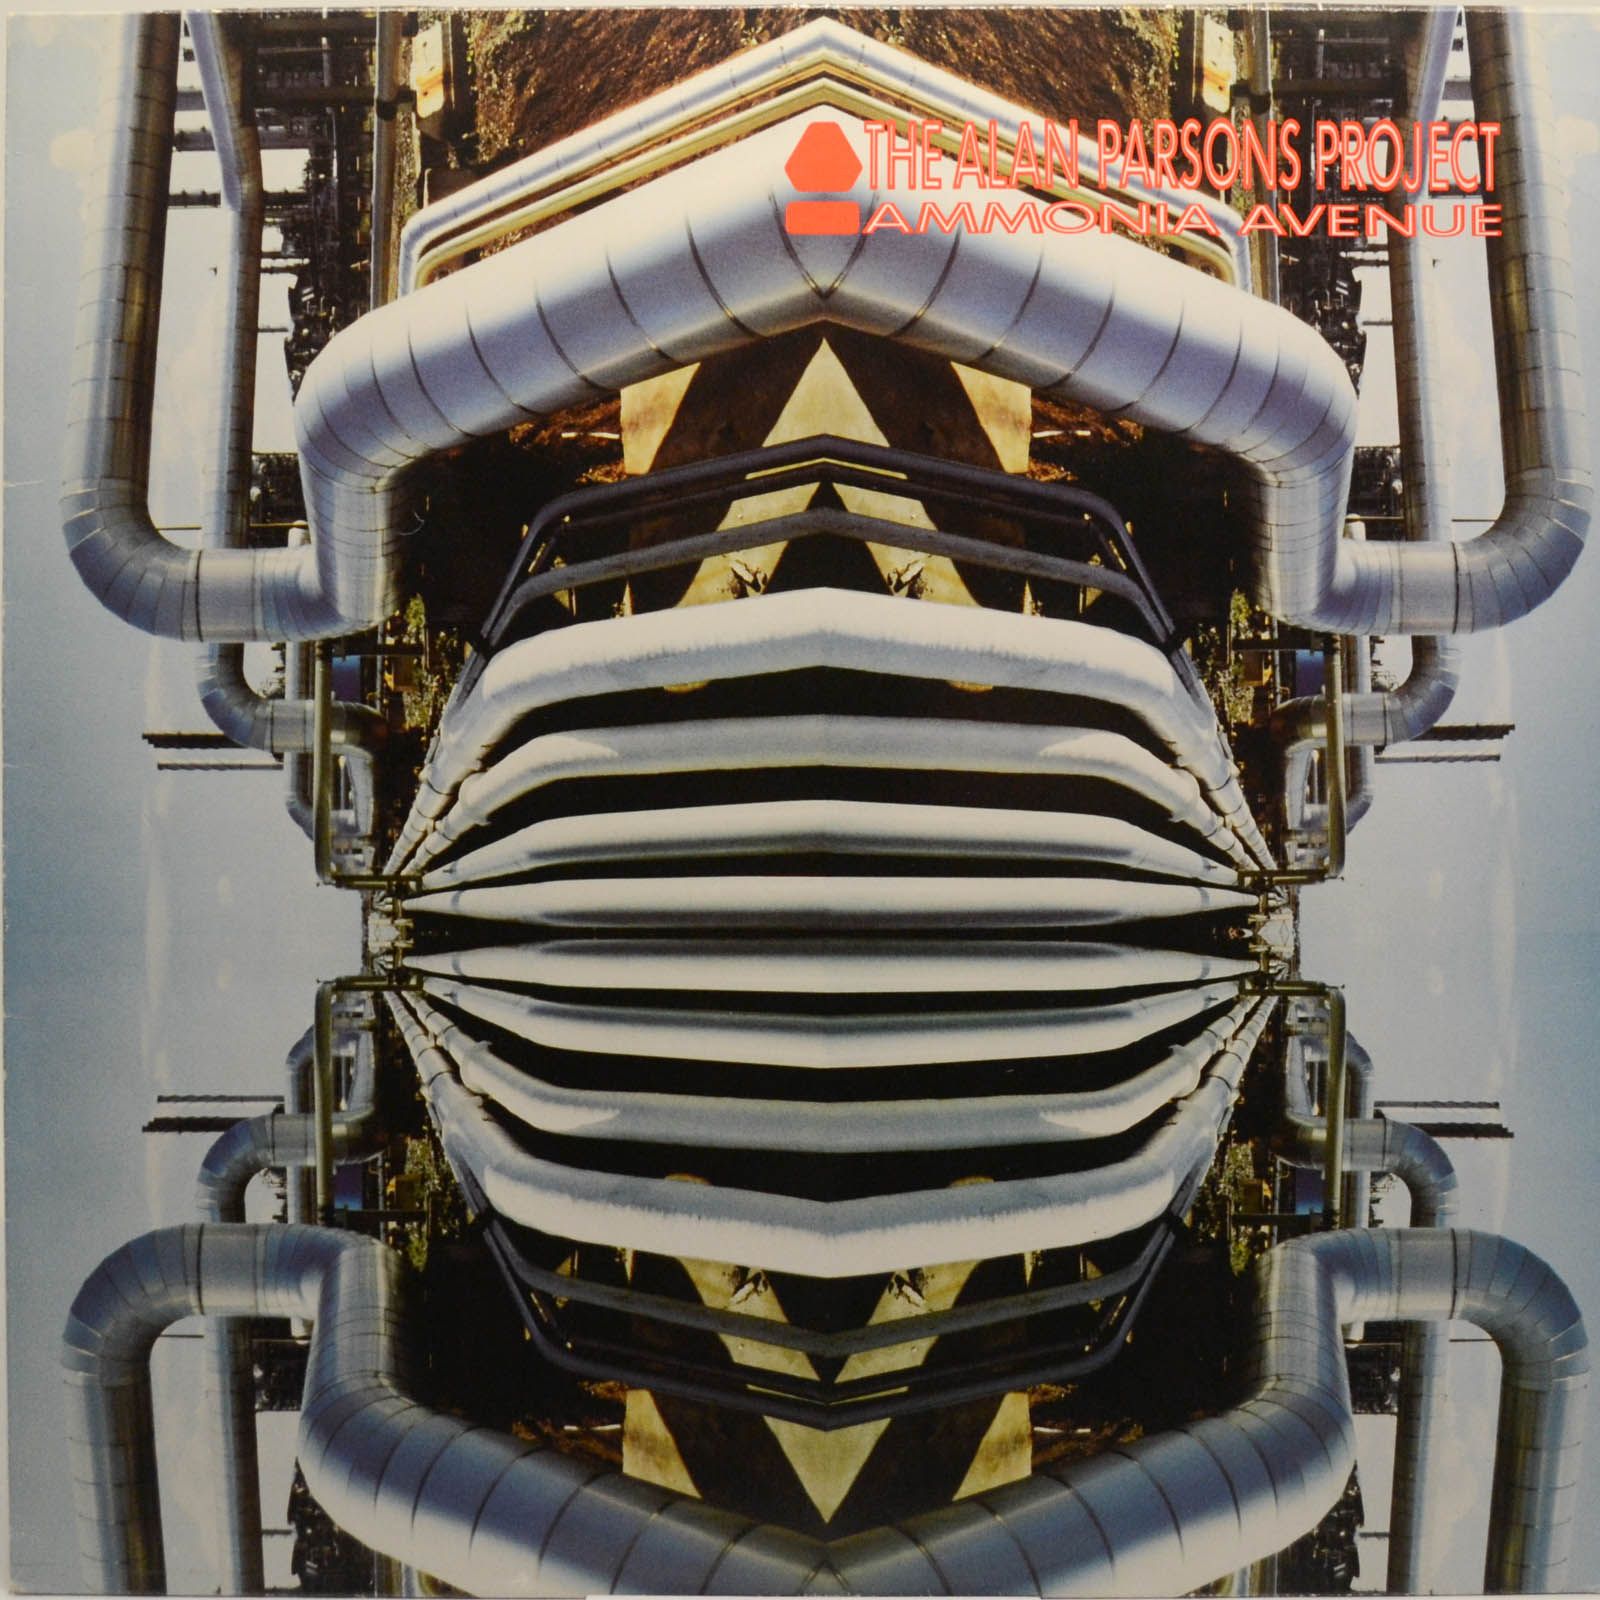 The Alan Parsons Project — Ammonia Avenue, 1984